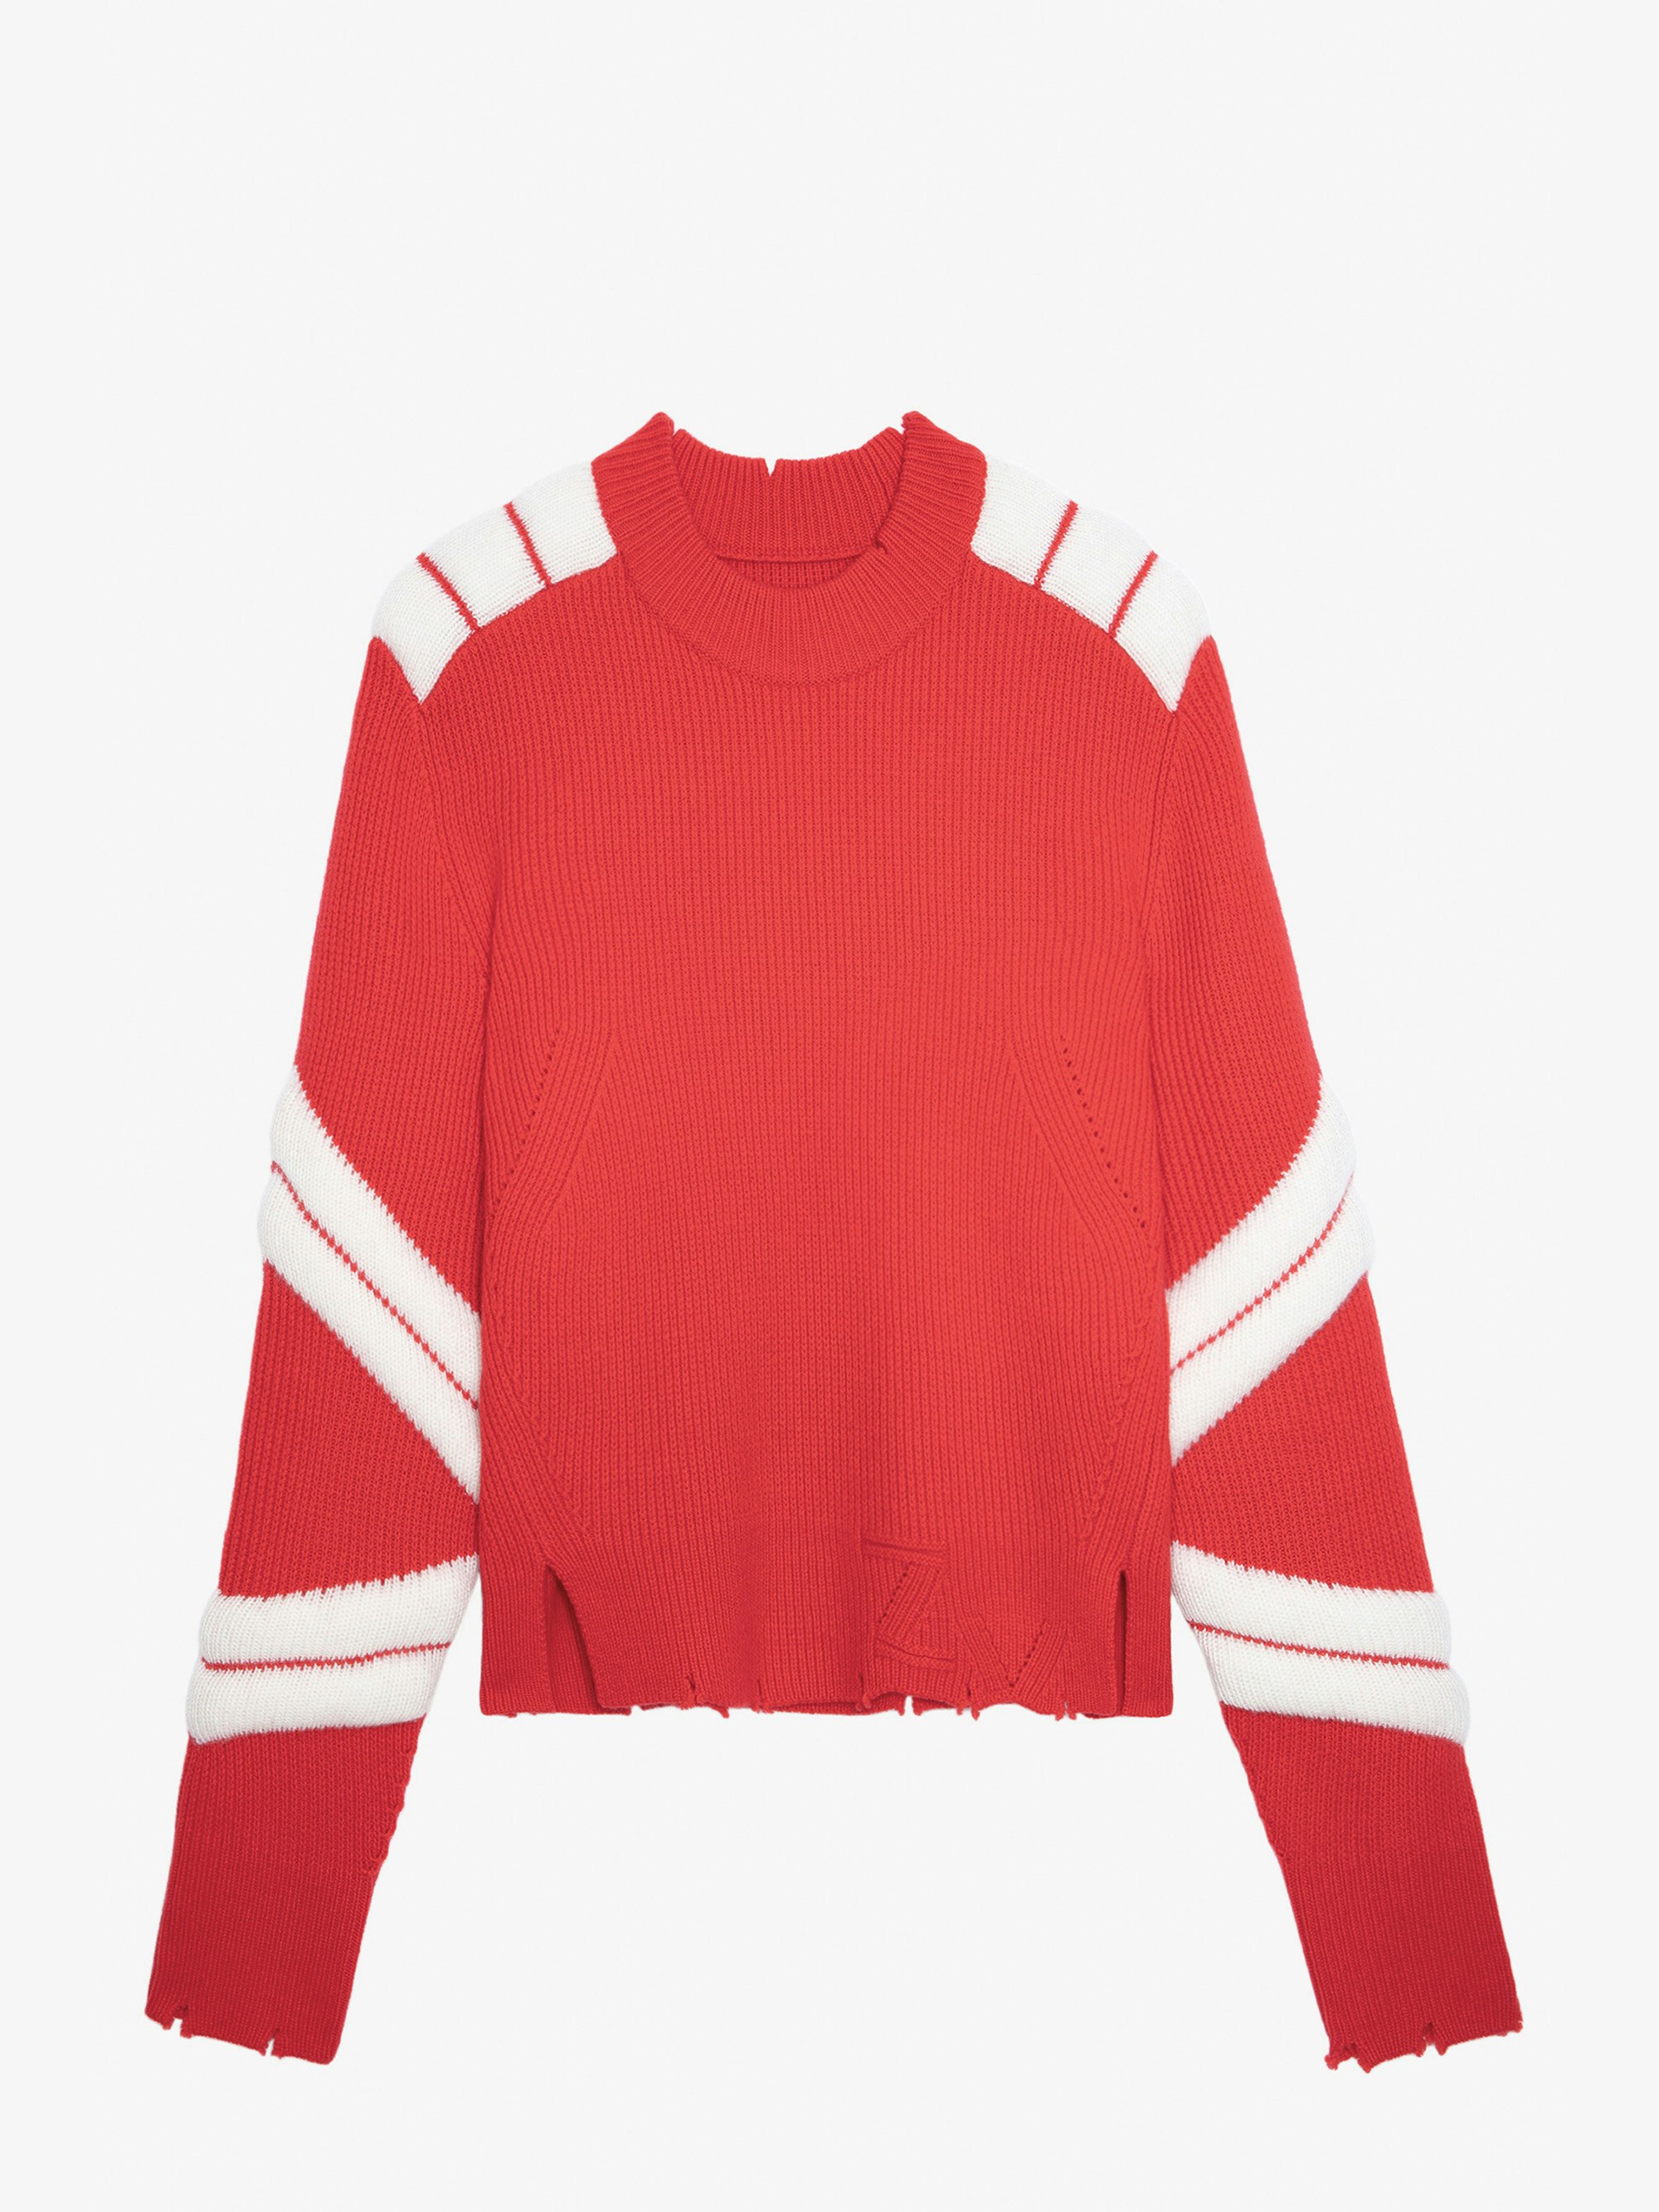 Georgia Sweater - Women’s red merino wool sweater with embossed contrasting motifs and distressed trim.